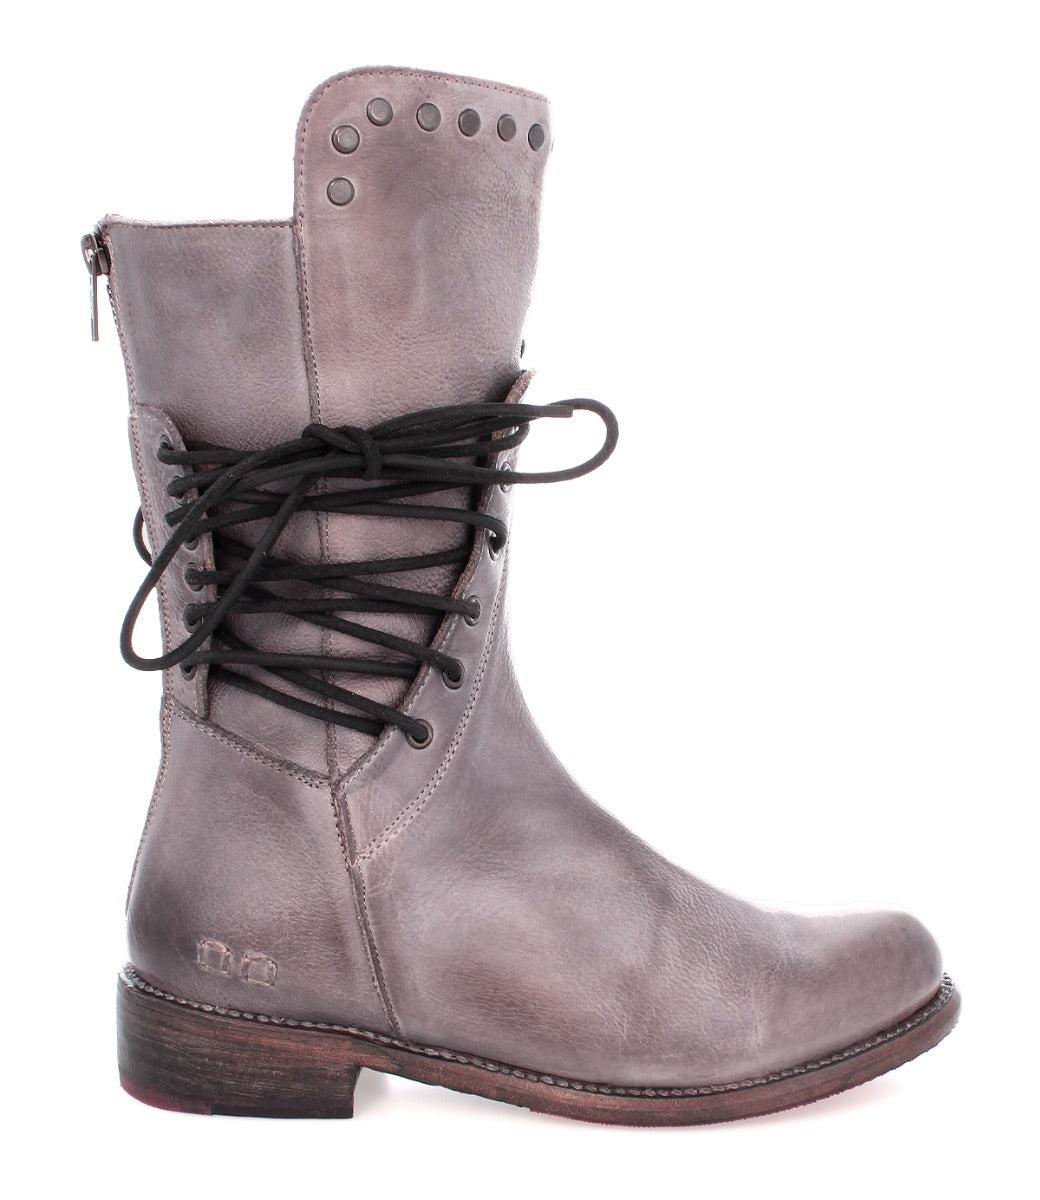 A women's grey leather Fen boot with laces by Bed Stu.